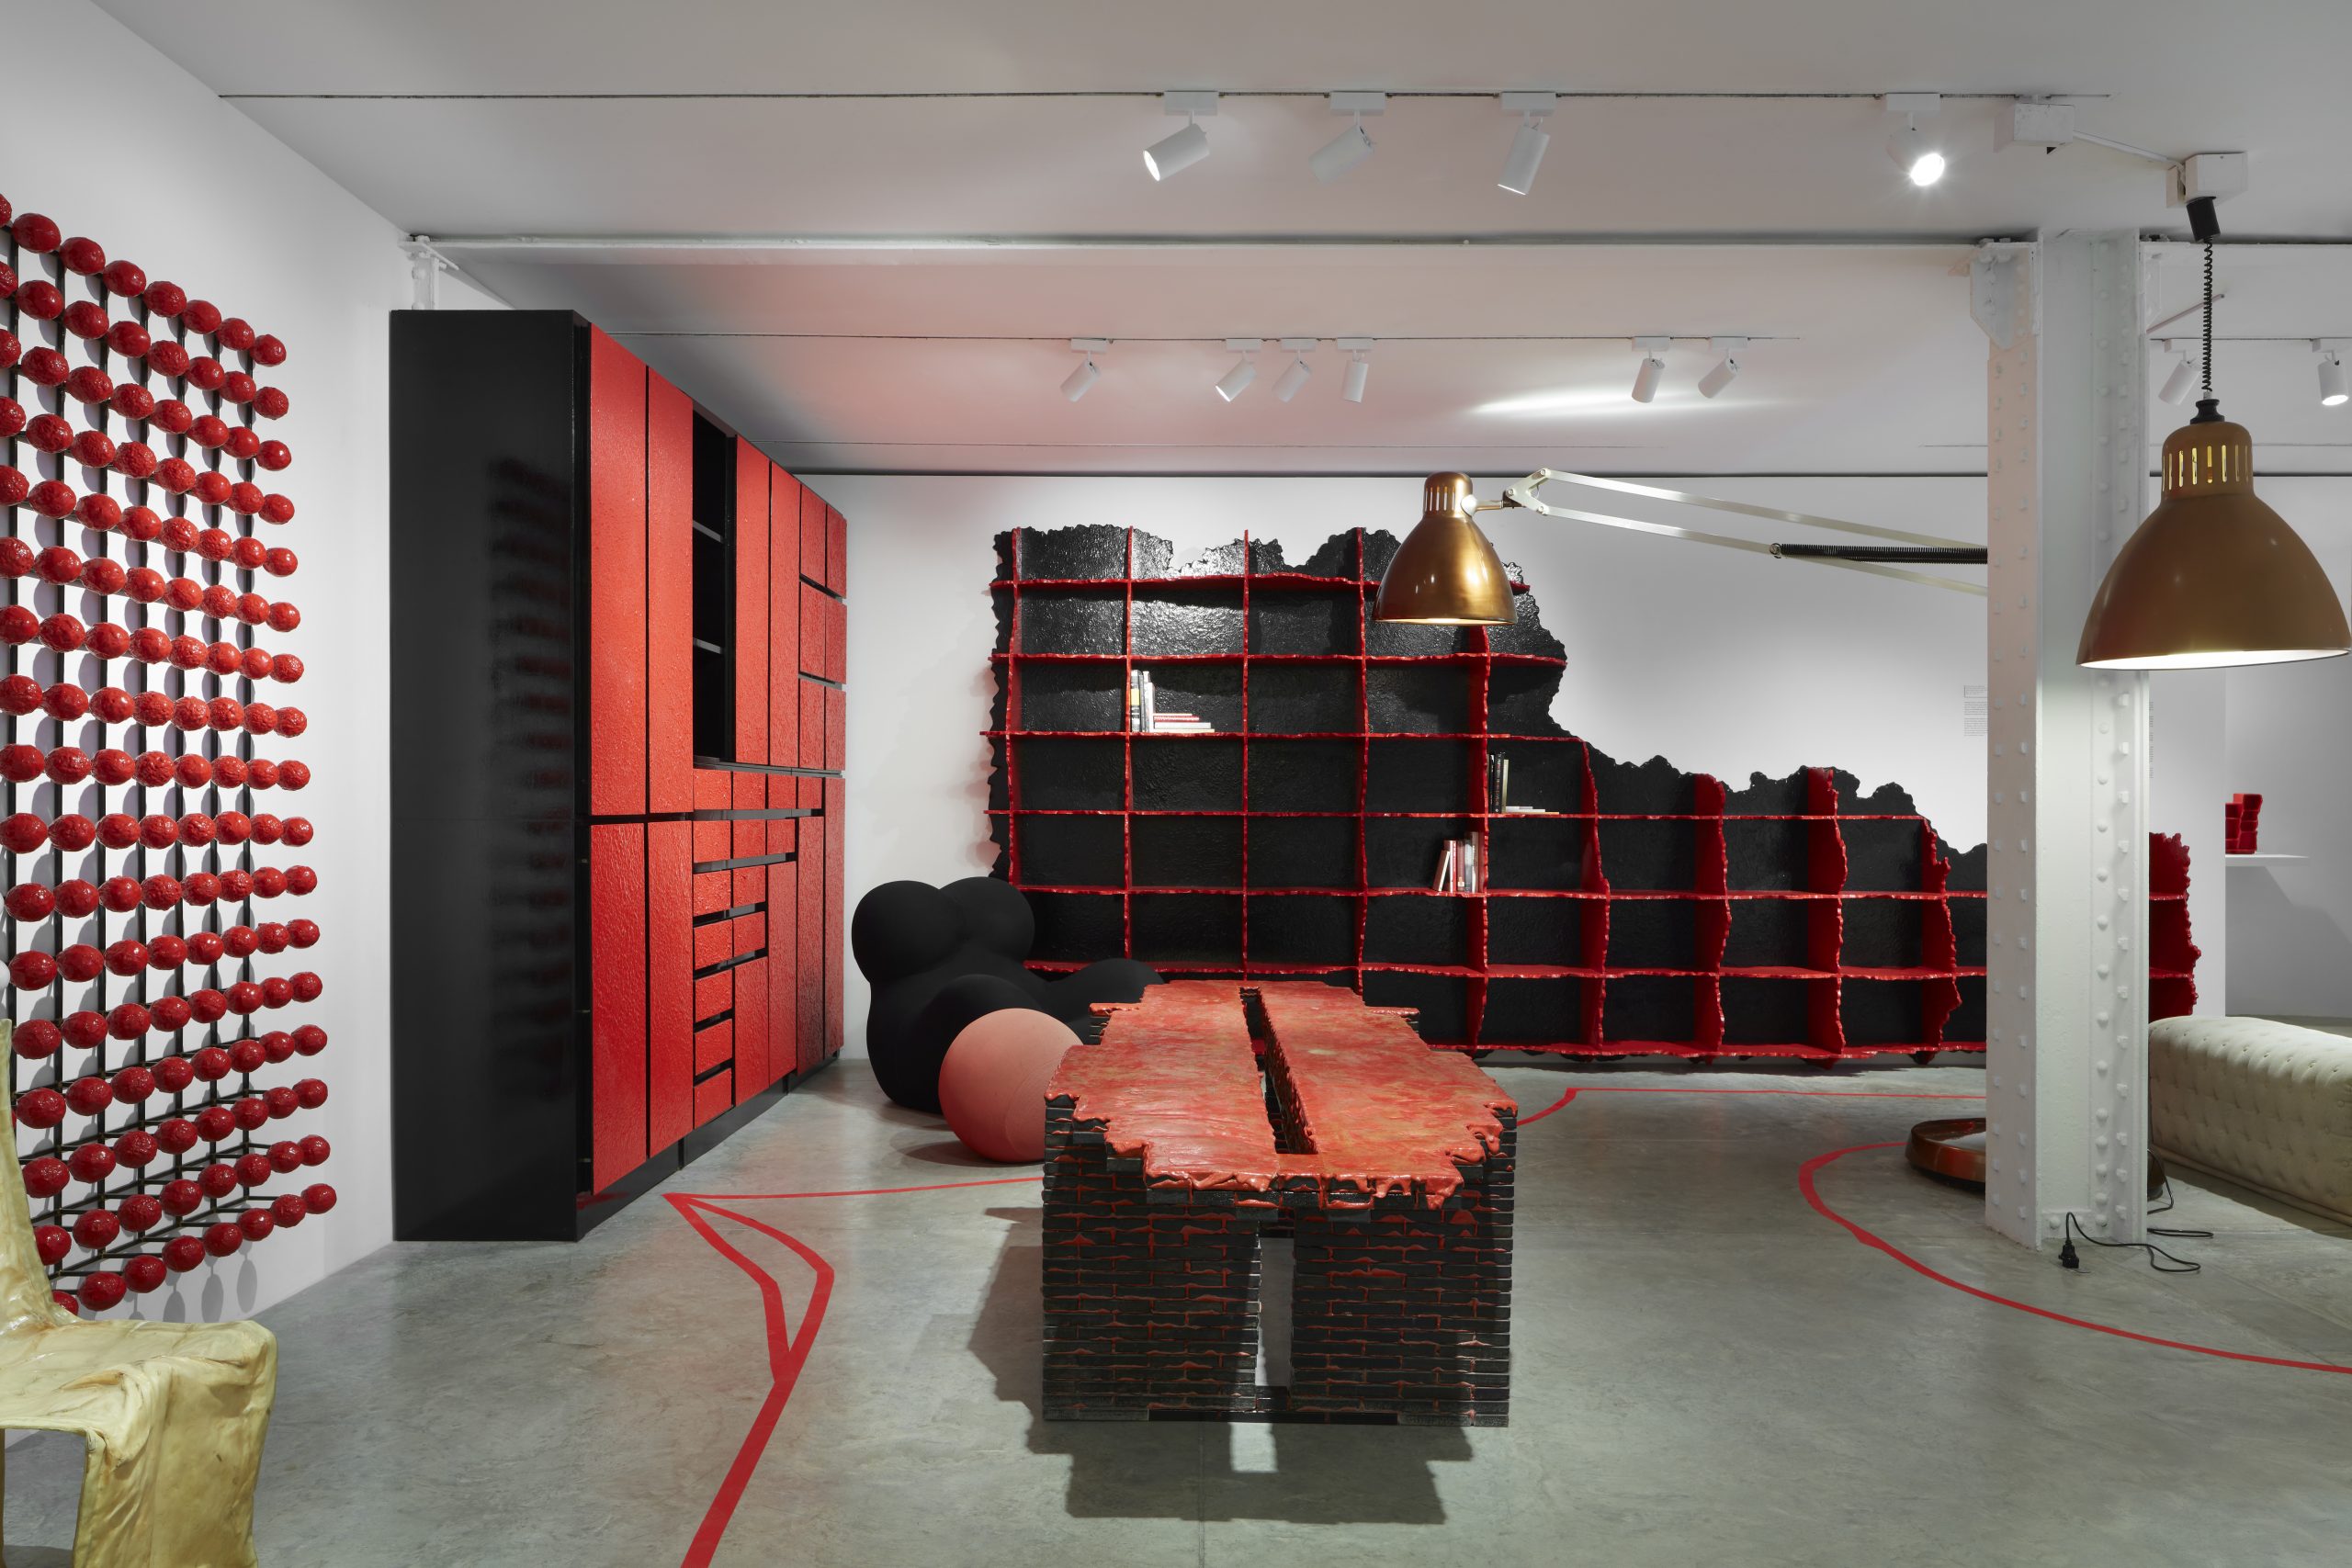 Display of melting red furniture designed by Gaetano Pesce